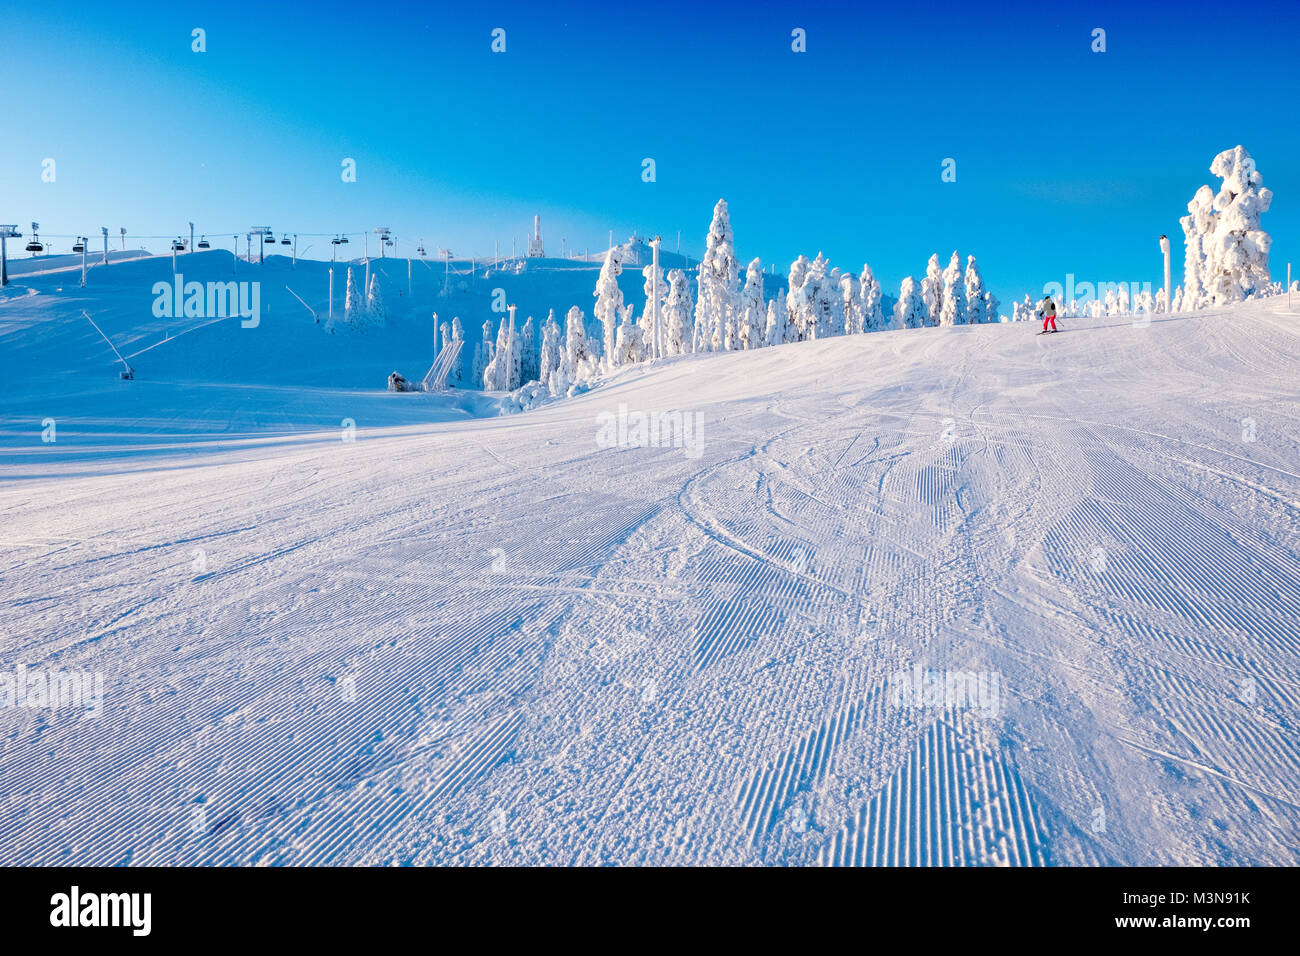 Skiers on the piste at The ski resort of Ruka in Finland Stock Photo